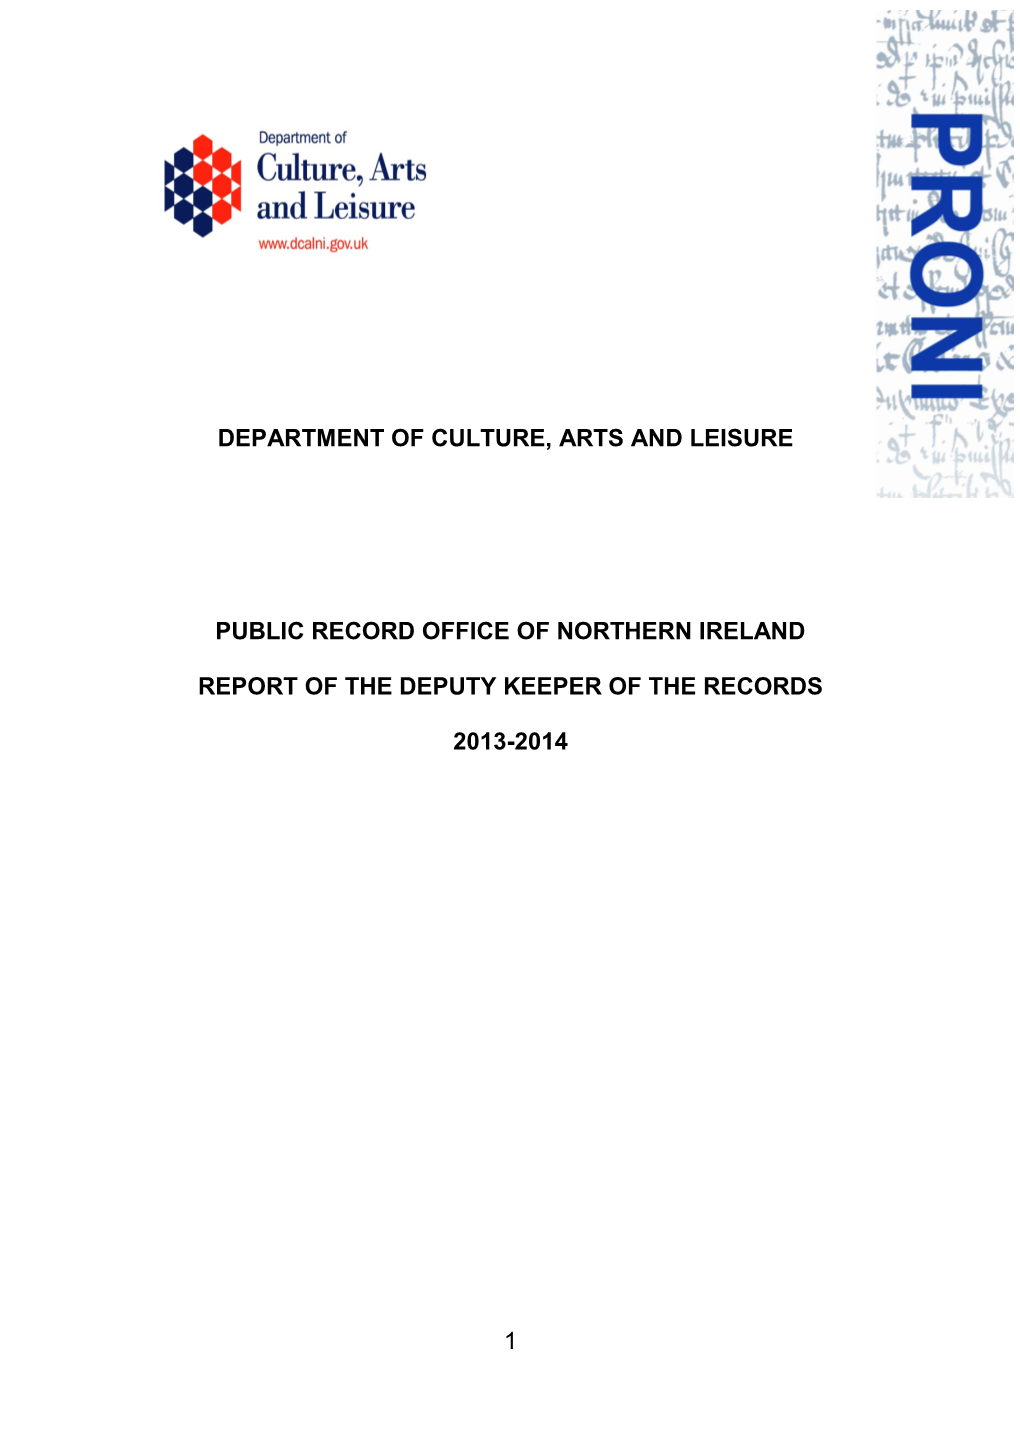 Department of Culture, Arts and Leisure Public Record